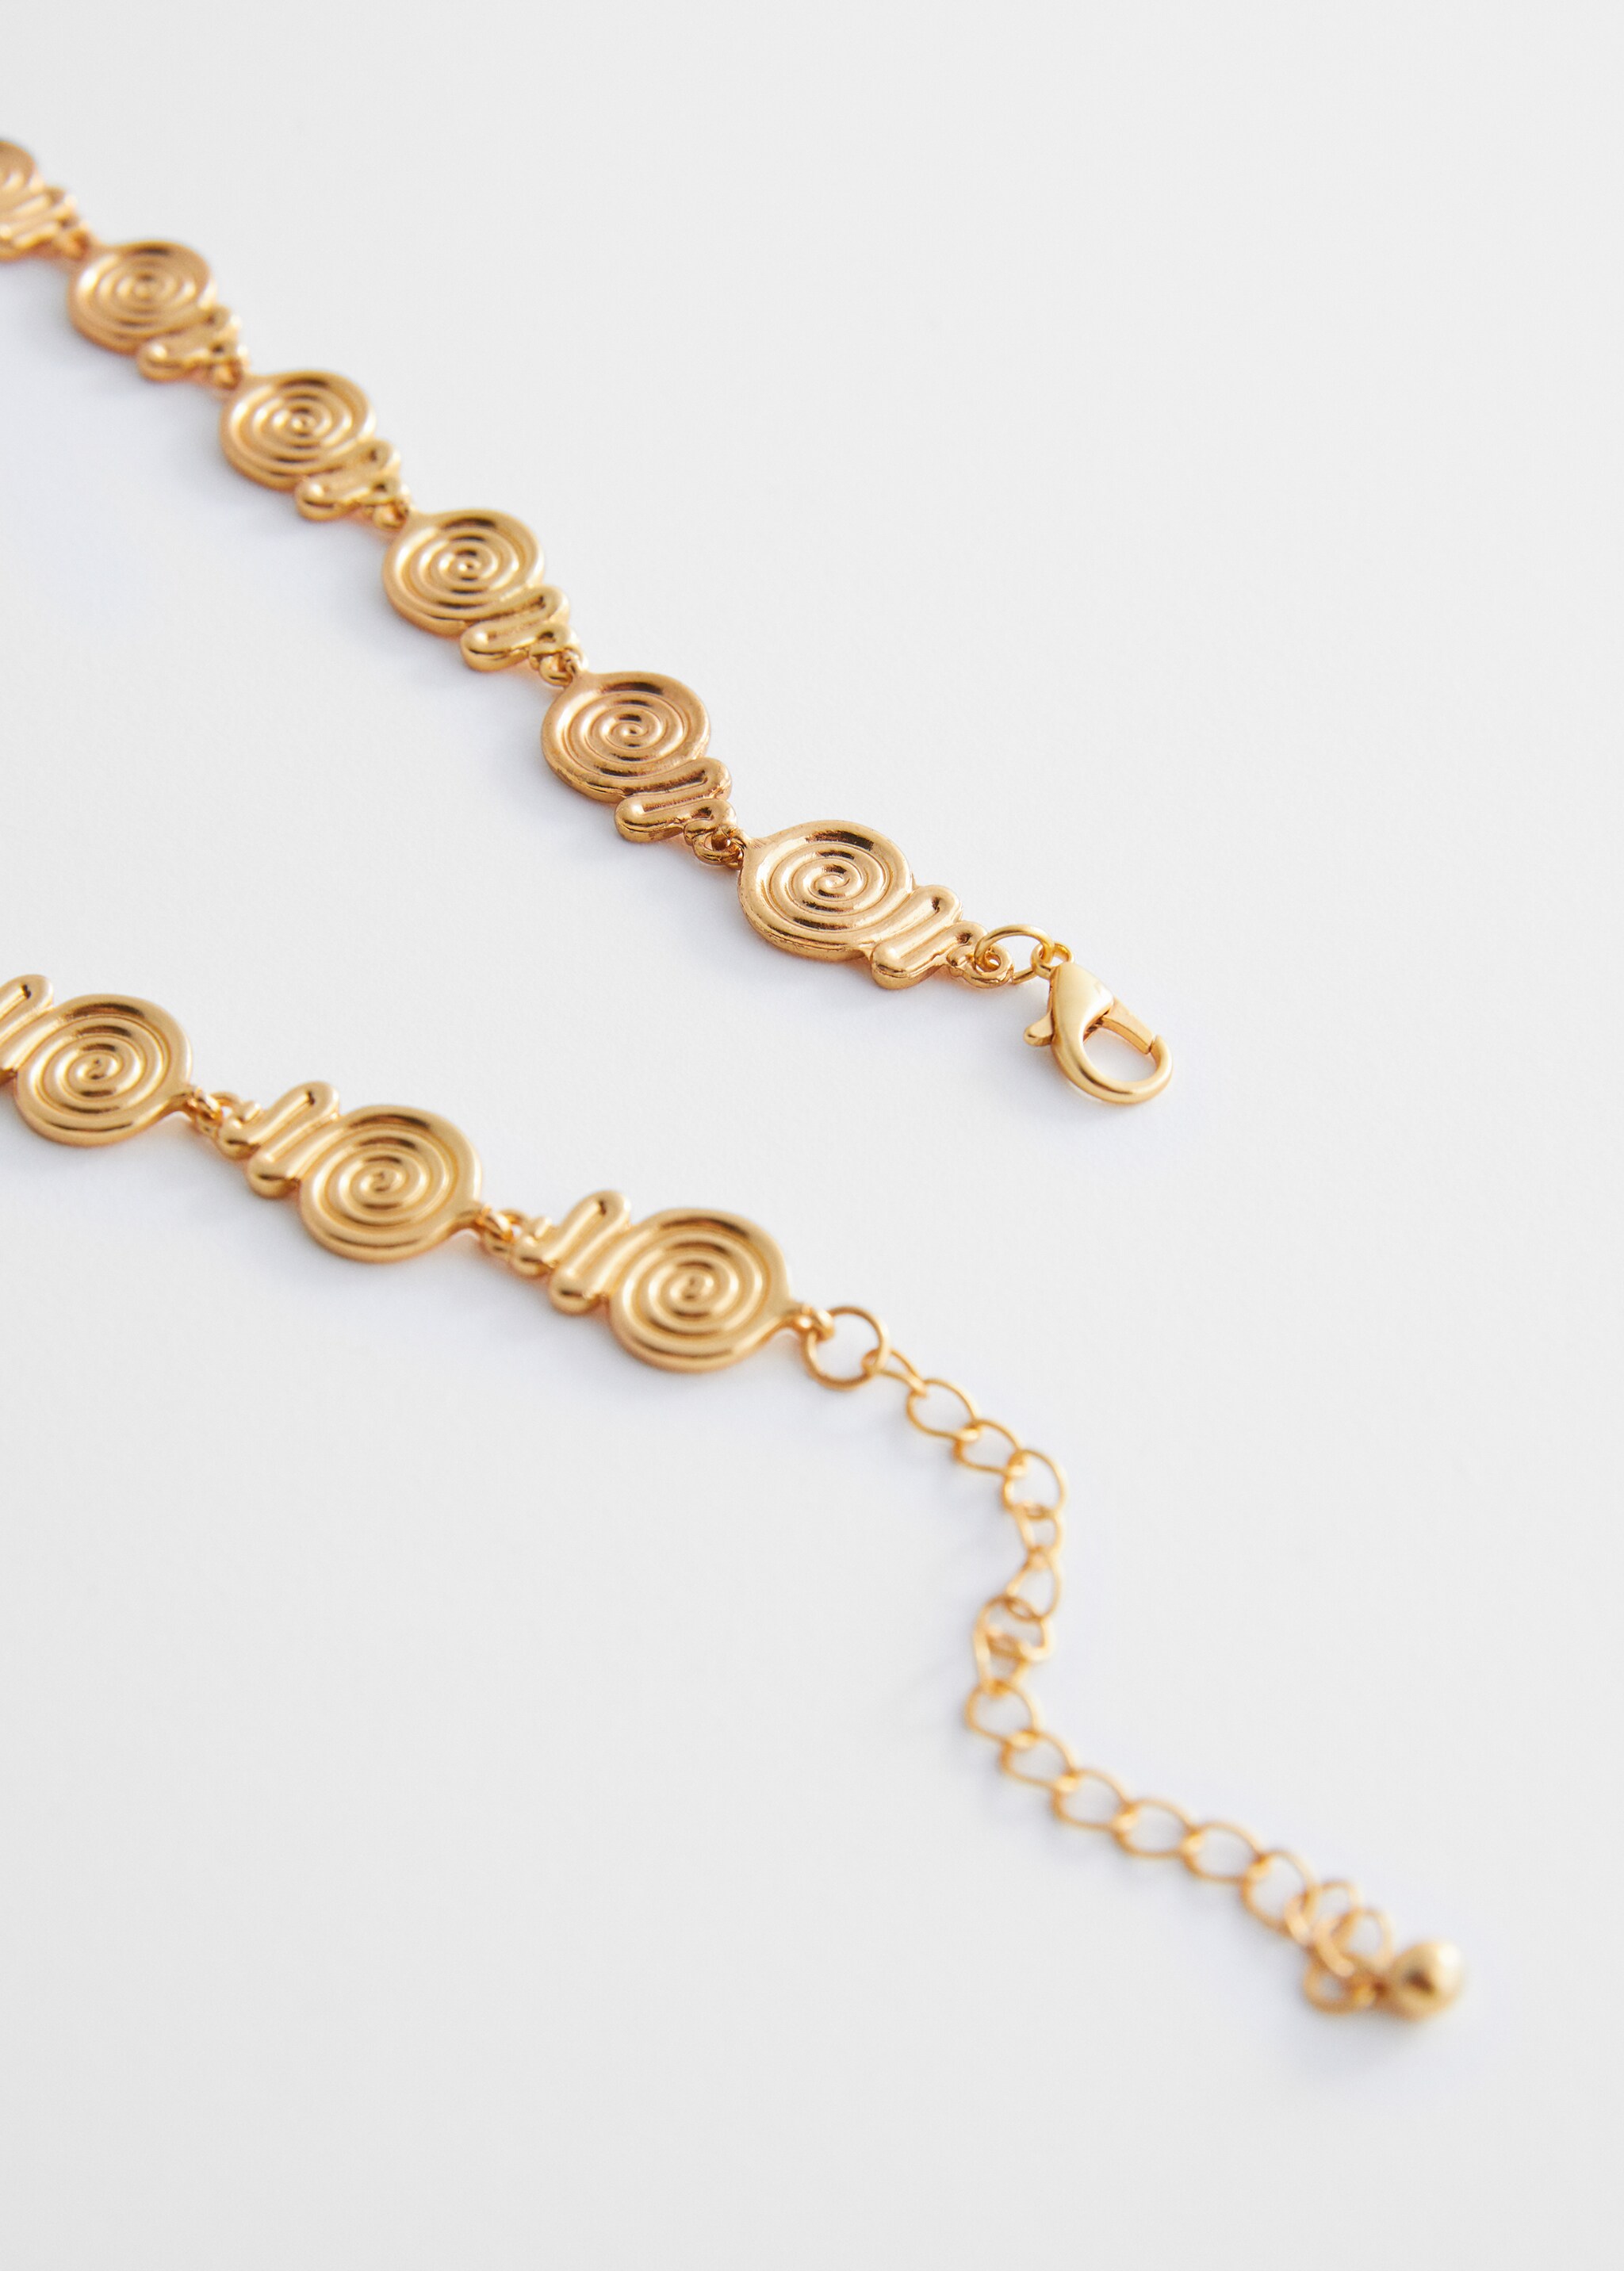 Spiral necklace - Details of the article 1